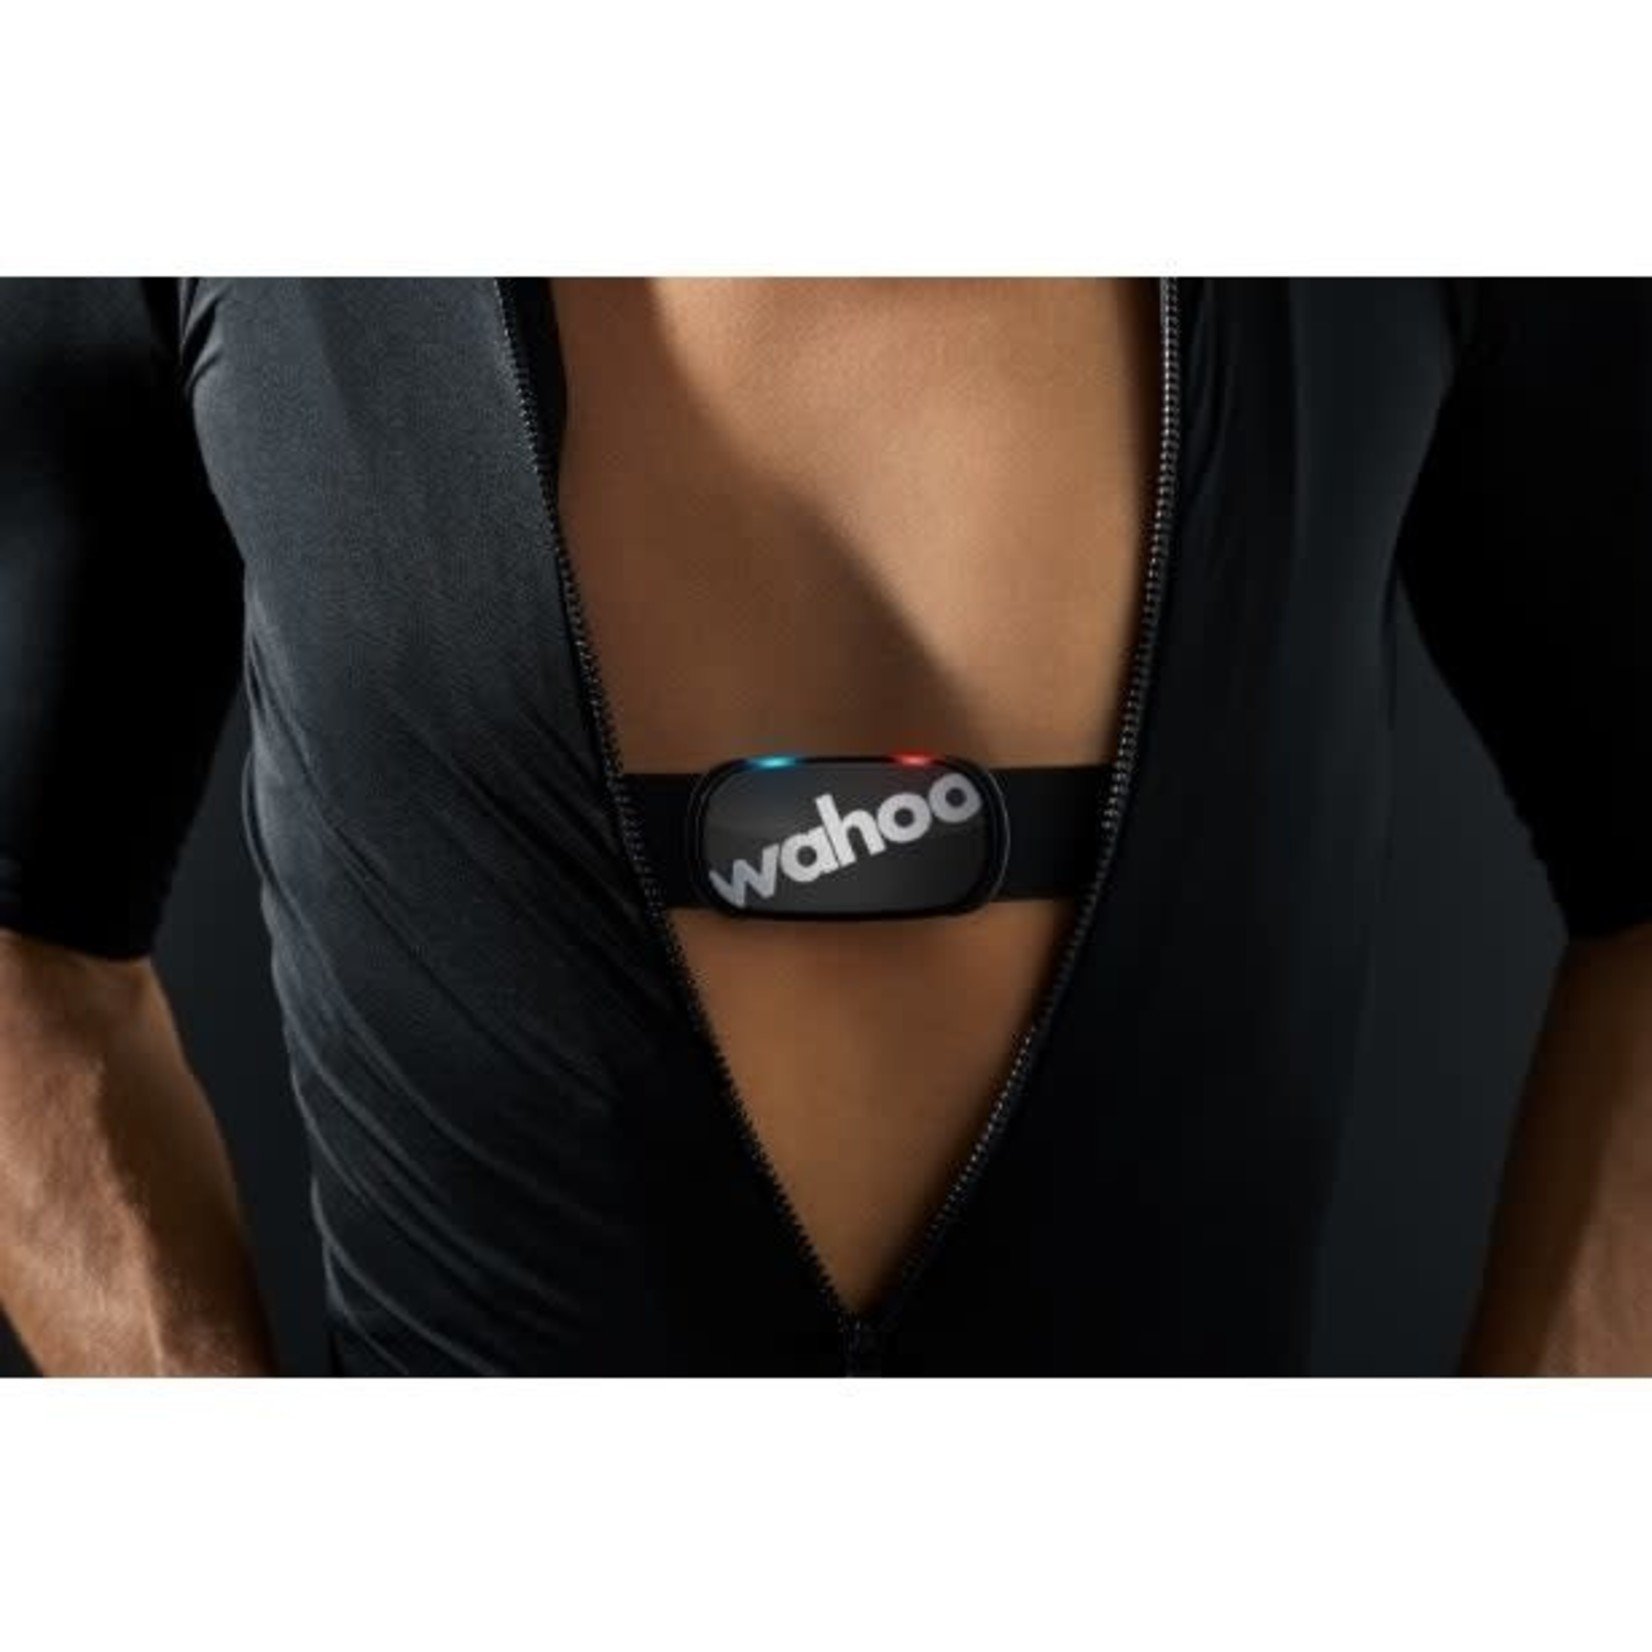 wahoo fitness Wahoo TICKR Heart Rate Monitor STEALTH GRAY